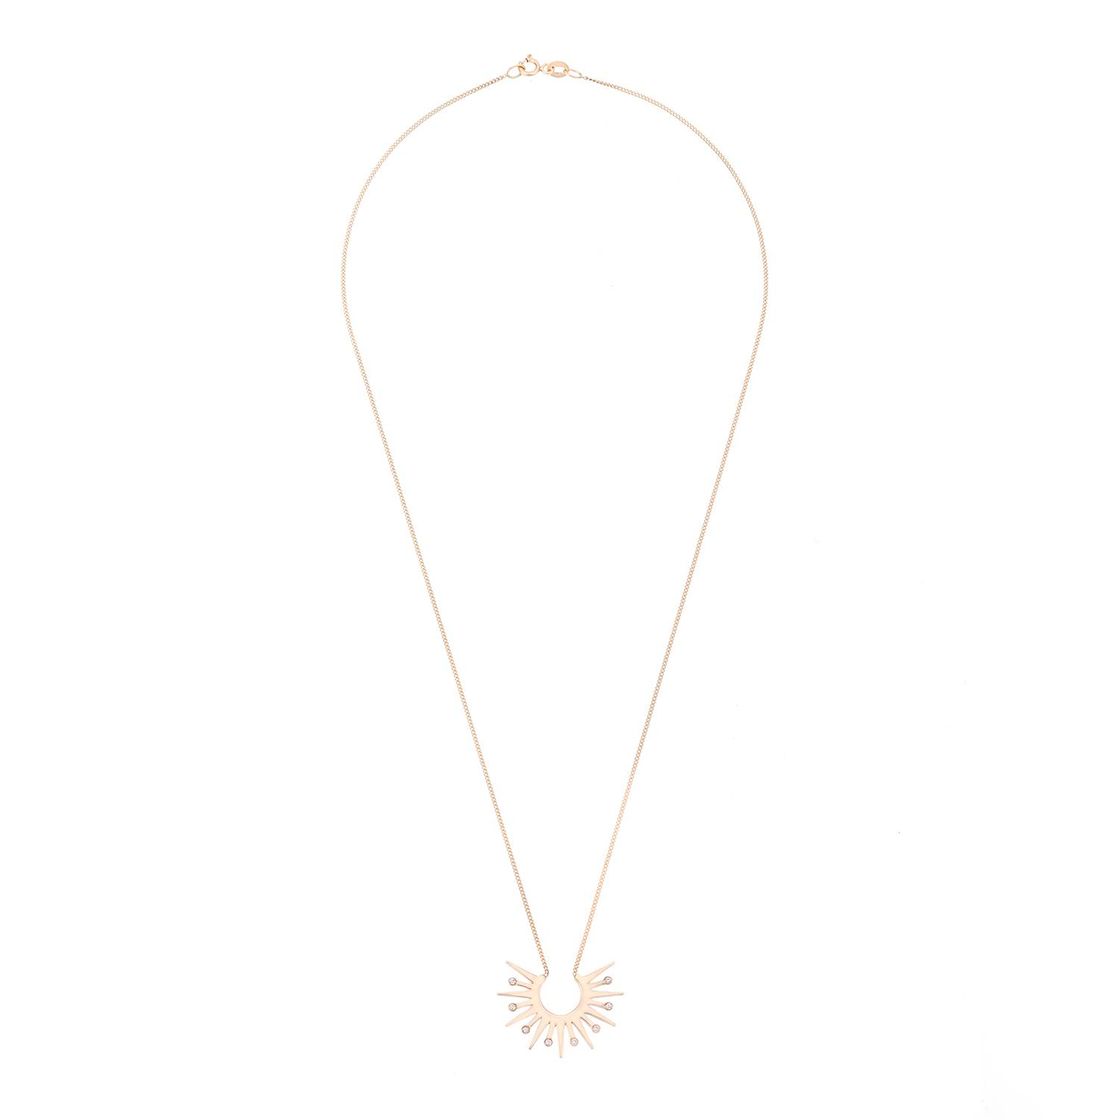 Shine Gold Necklace with Diamond Stones